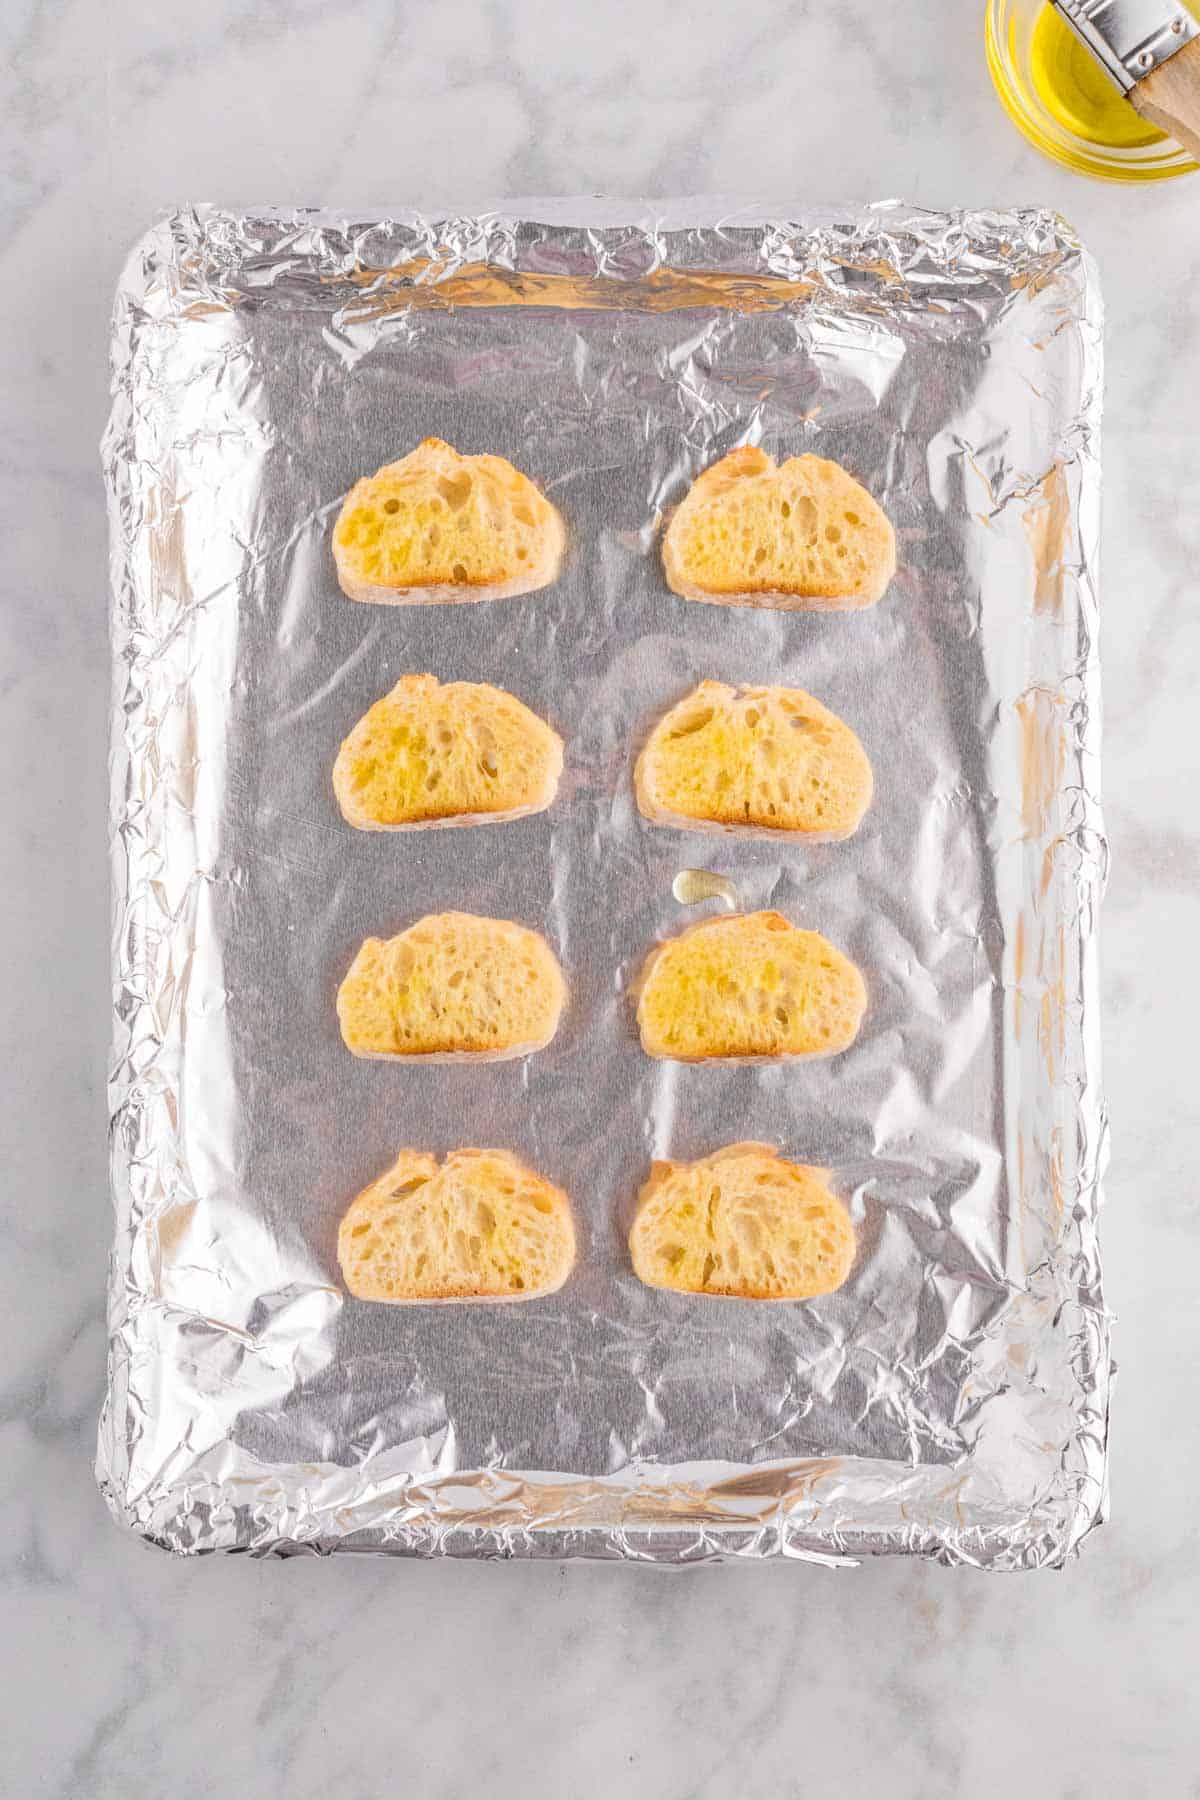 French baguette slices on a foil lined baking sheet